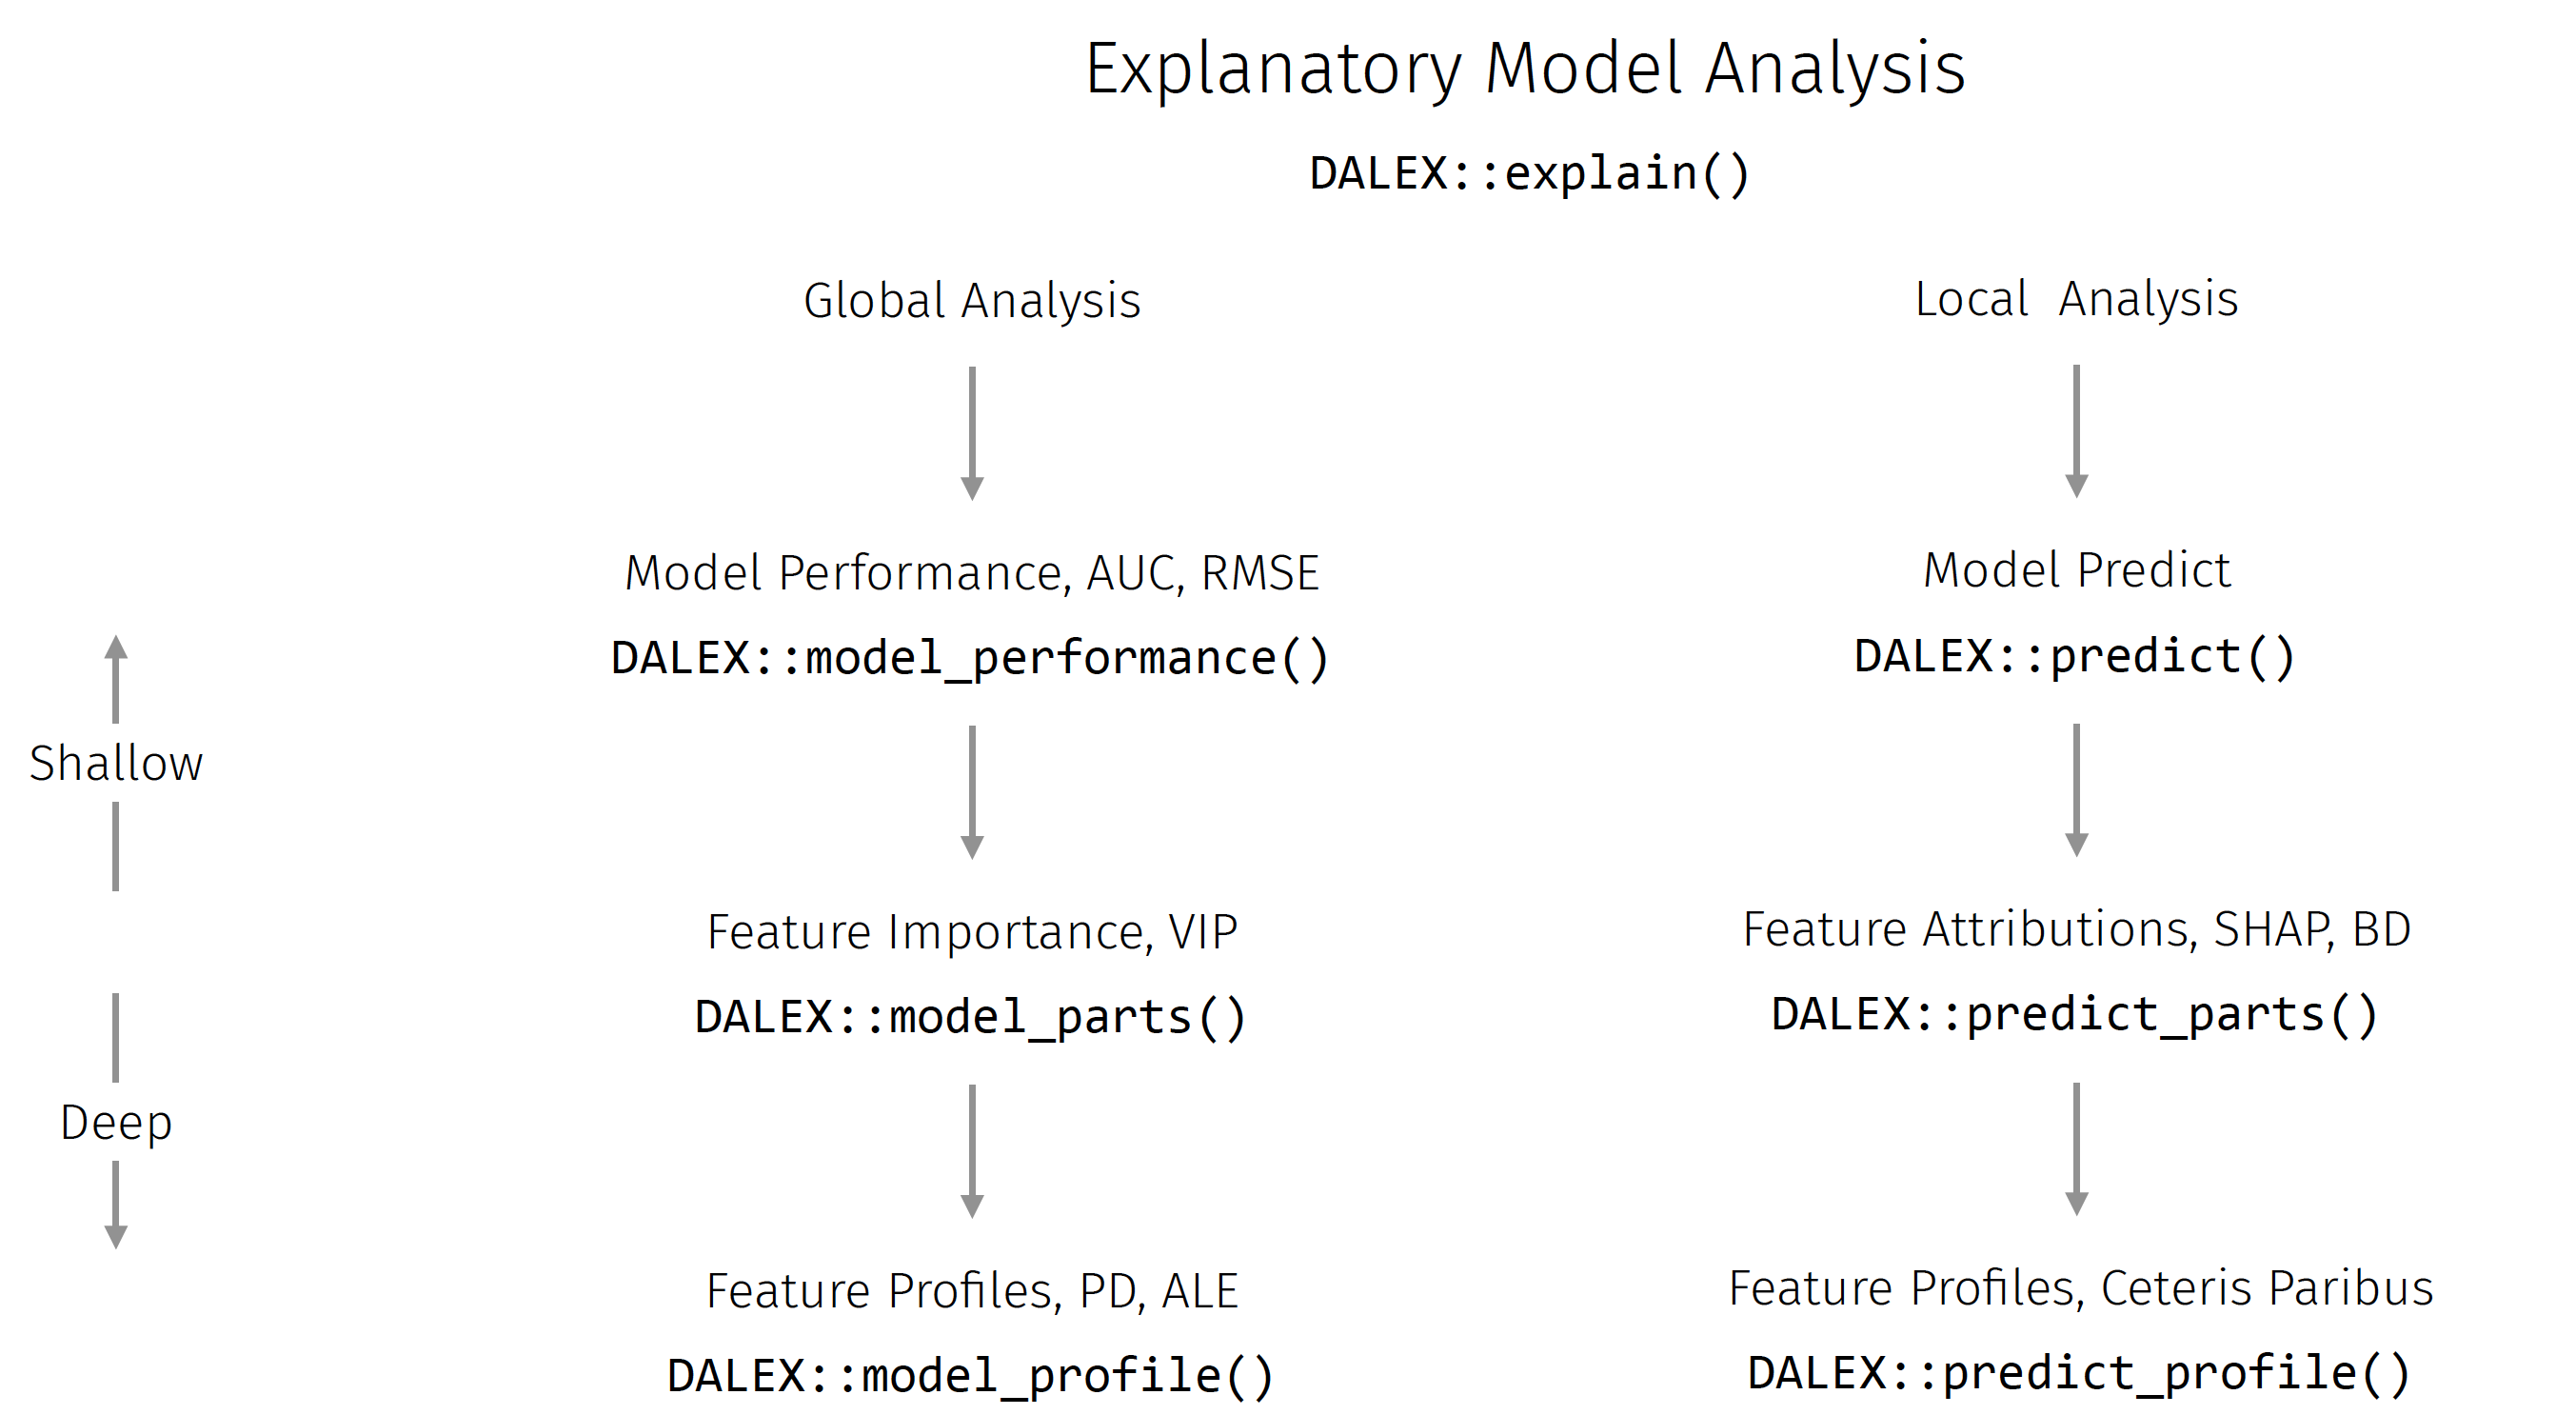 Title says 'Explanatory Model Analysis', just below that in code font says 'DALEX::explain()'. Far left side is an arrow pointing upwards labeled 'Shallow' and one pointing down labeled 'Deep'. To the right of these arrows is the text 'Global Analysis' with an arrow pointing down to 'Model Performance, AUC, RMSE; DALEX::model_performance()', which has an arrow pointing down to 'Feature Importance, VIP; DALEX::model_parts()', which has an arrow pointing down to 'Feature Profiles, PD, ALE; DALEX::model_profile()'. To the right of 'Global Analysis' is the text 'Local Analysis', which has an arrow pointing to 'Model Predict; DALEX::predict()', which has an arrow pointing down to 'Feature Attributions, SHAP, BD; DALEX::predict_parts()', which has an arrow pointing down to 'Feature Profiles, Ceteris Paribus; DALEX::predict_profile()'.